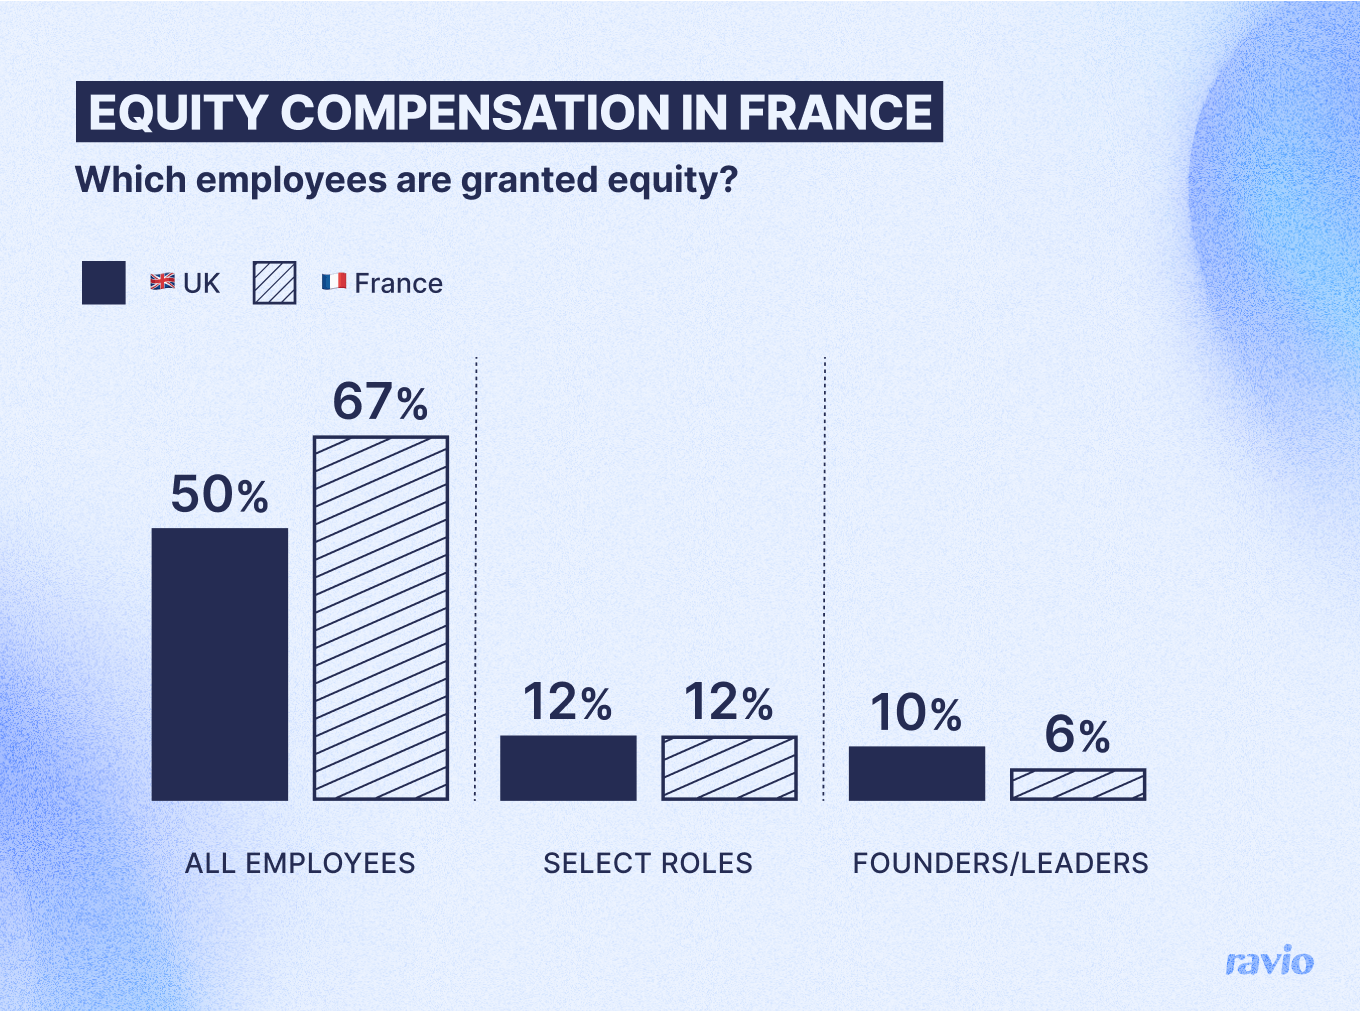 Equity compensation in france. 15% of companies do not offer equity compensation; 67% offer equity compensation to all employees; 12% of companies offer equity compensation to some employees; 6% of companies offer equity only to C-level leaders.